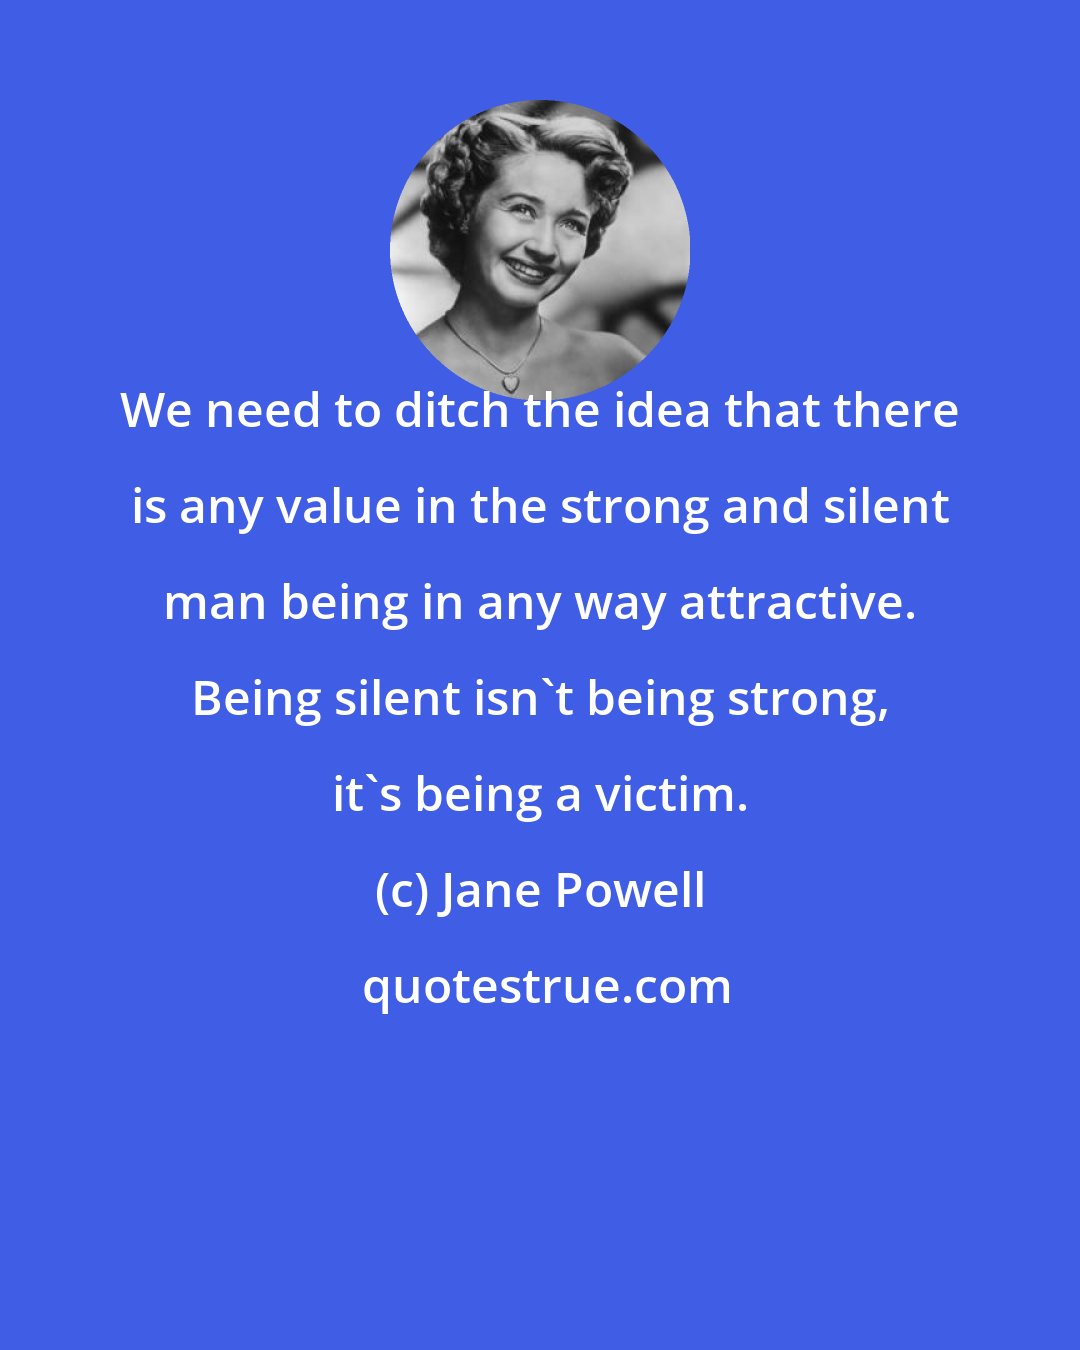 Jane Powell: We need to ditch the idea that there is any value in the strong and silent man being in any way attractive. Being silent isn't being strong, it's being a victim.